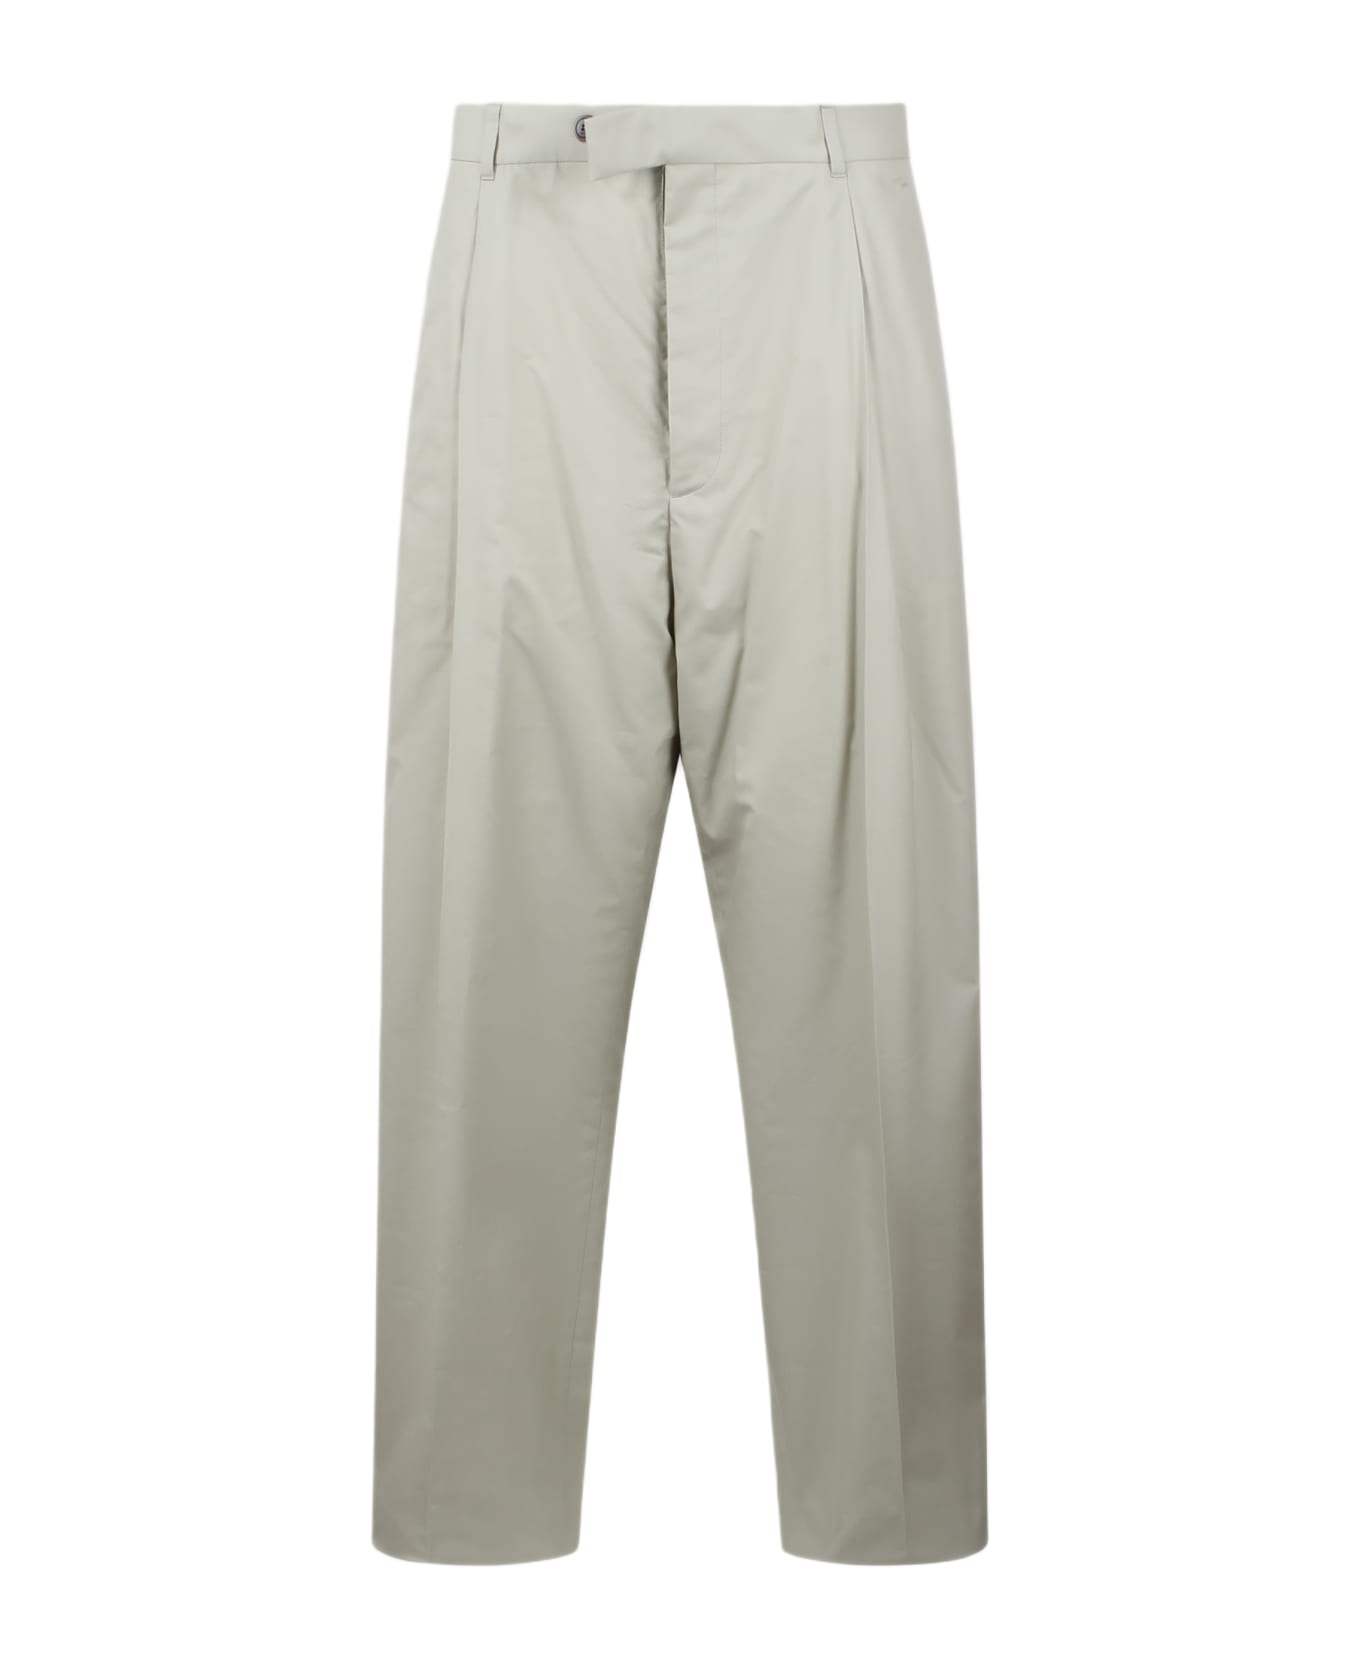 Dior Pleated Pants - Nude & Neutrals